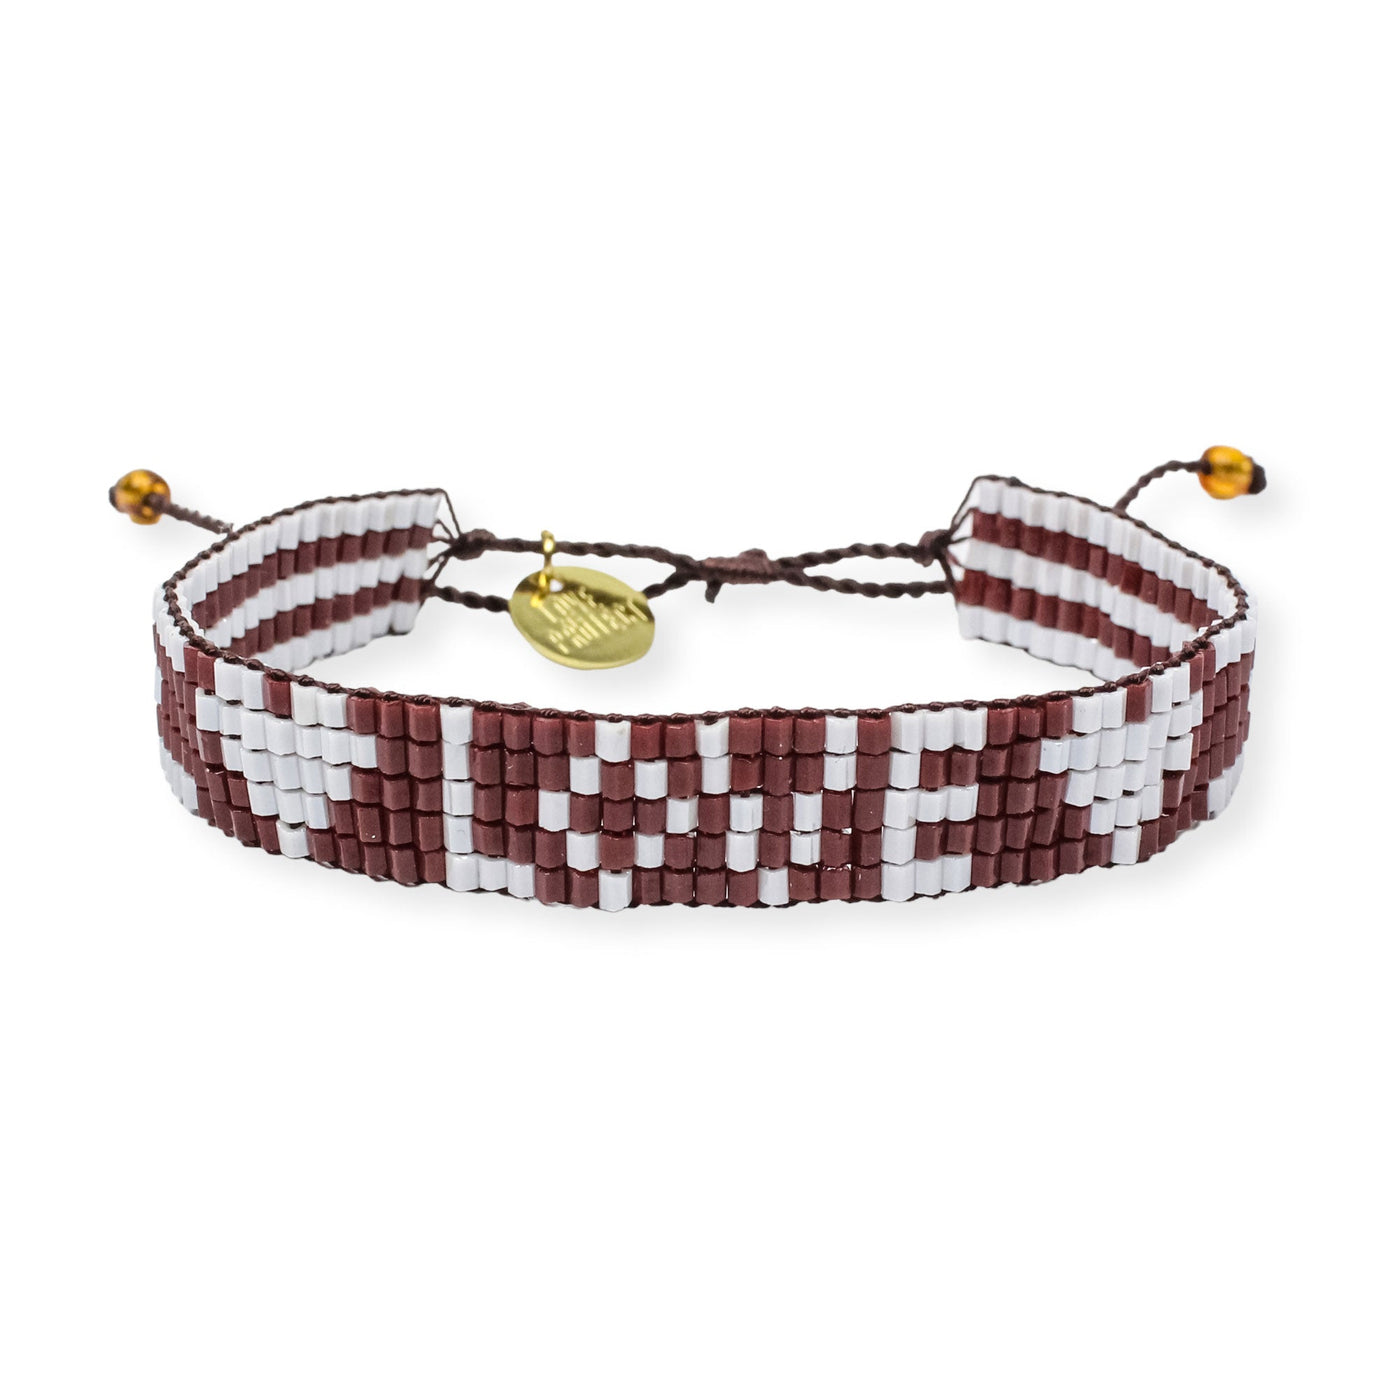 Seed Bead LOVE with Hearts Bracelet - Burgundy and White